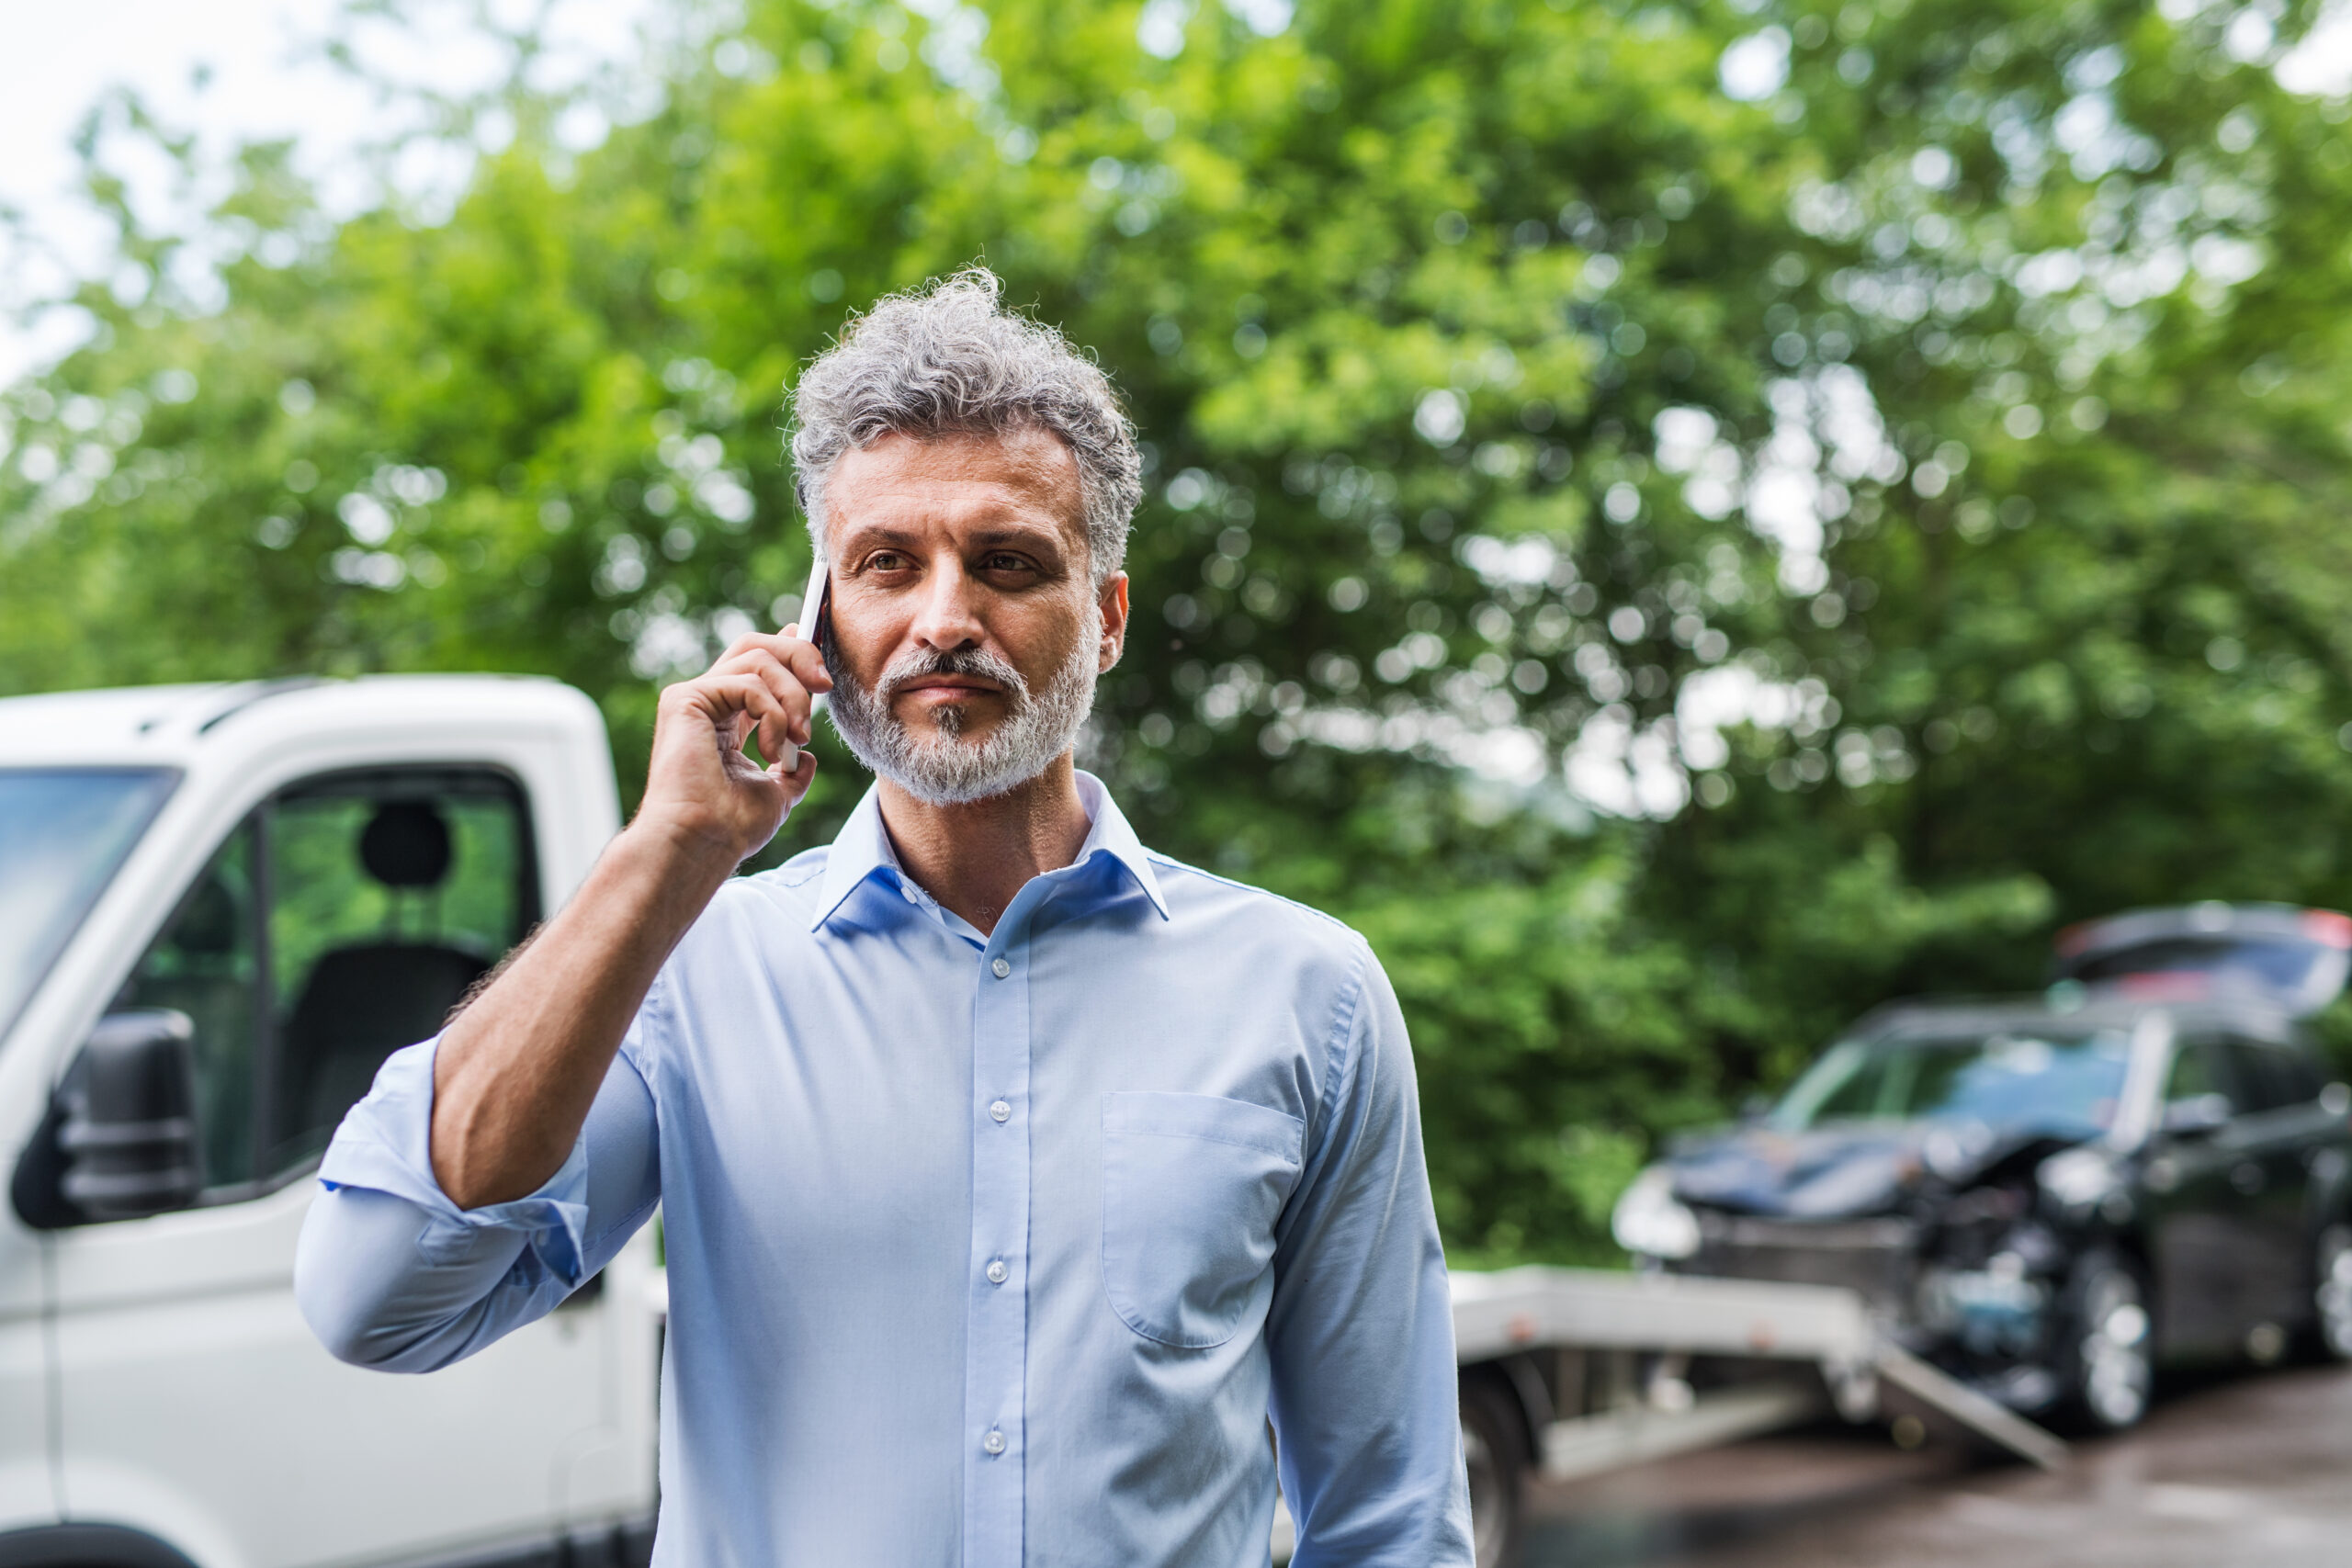 Man making a phone call after a car accident